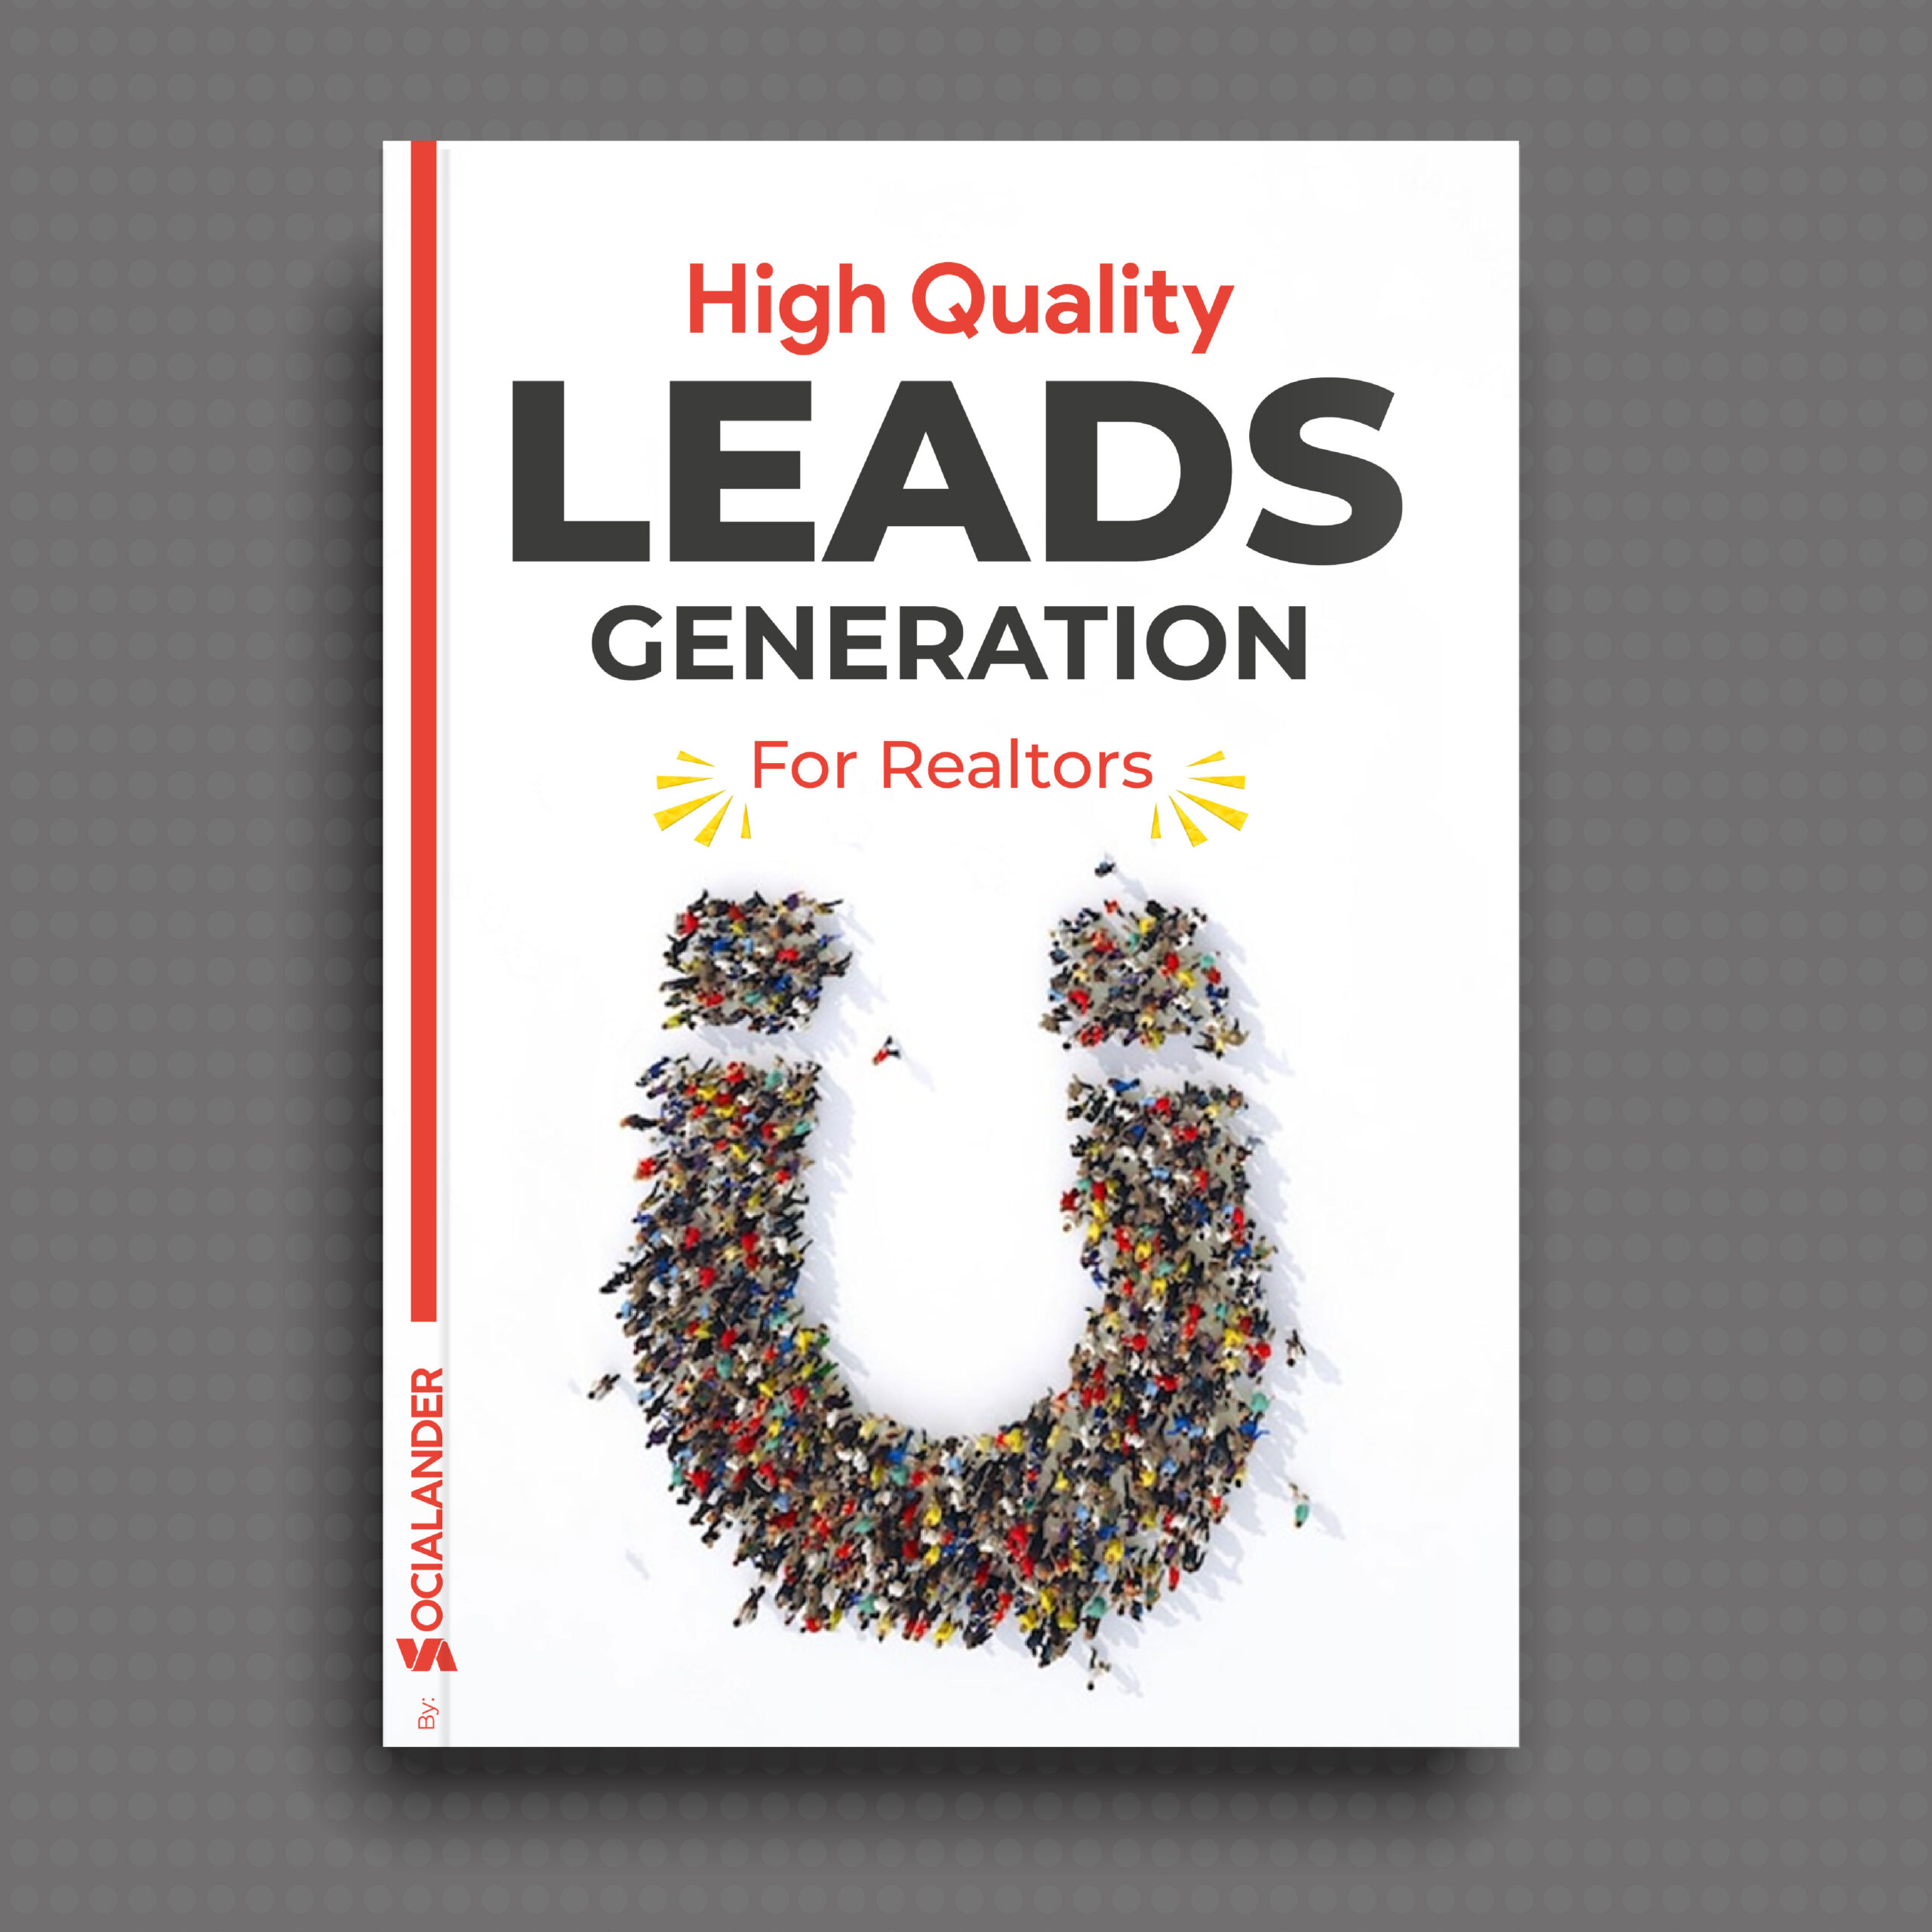 High Quality Leads Generation For Realtors